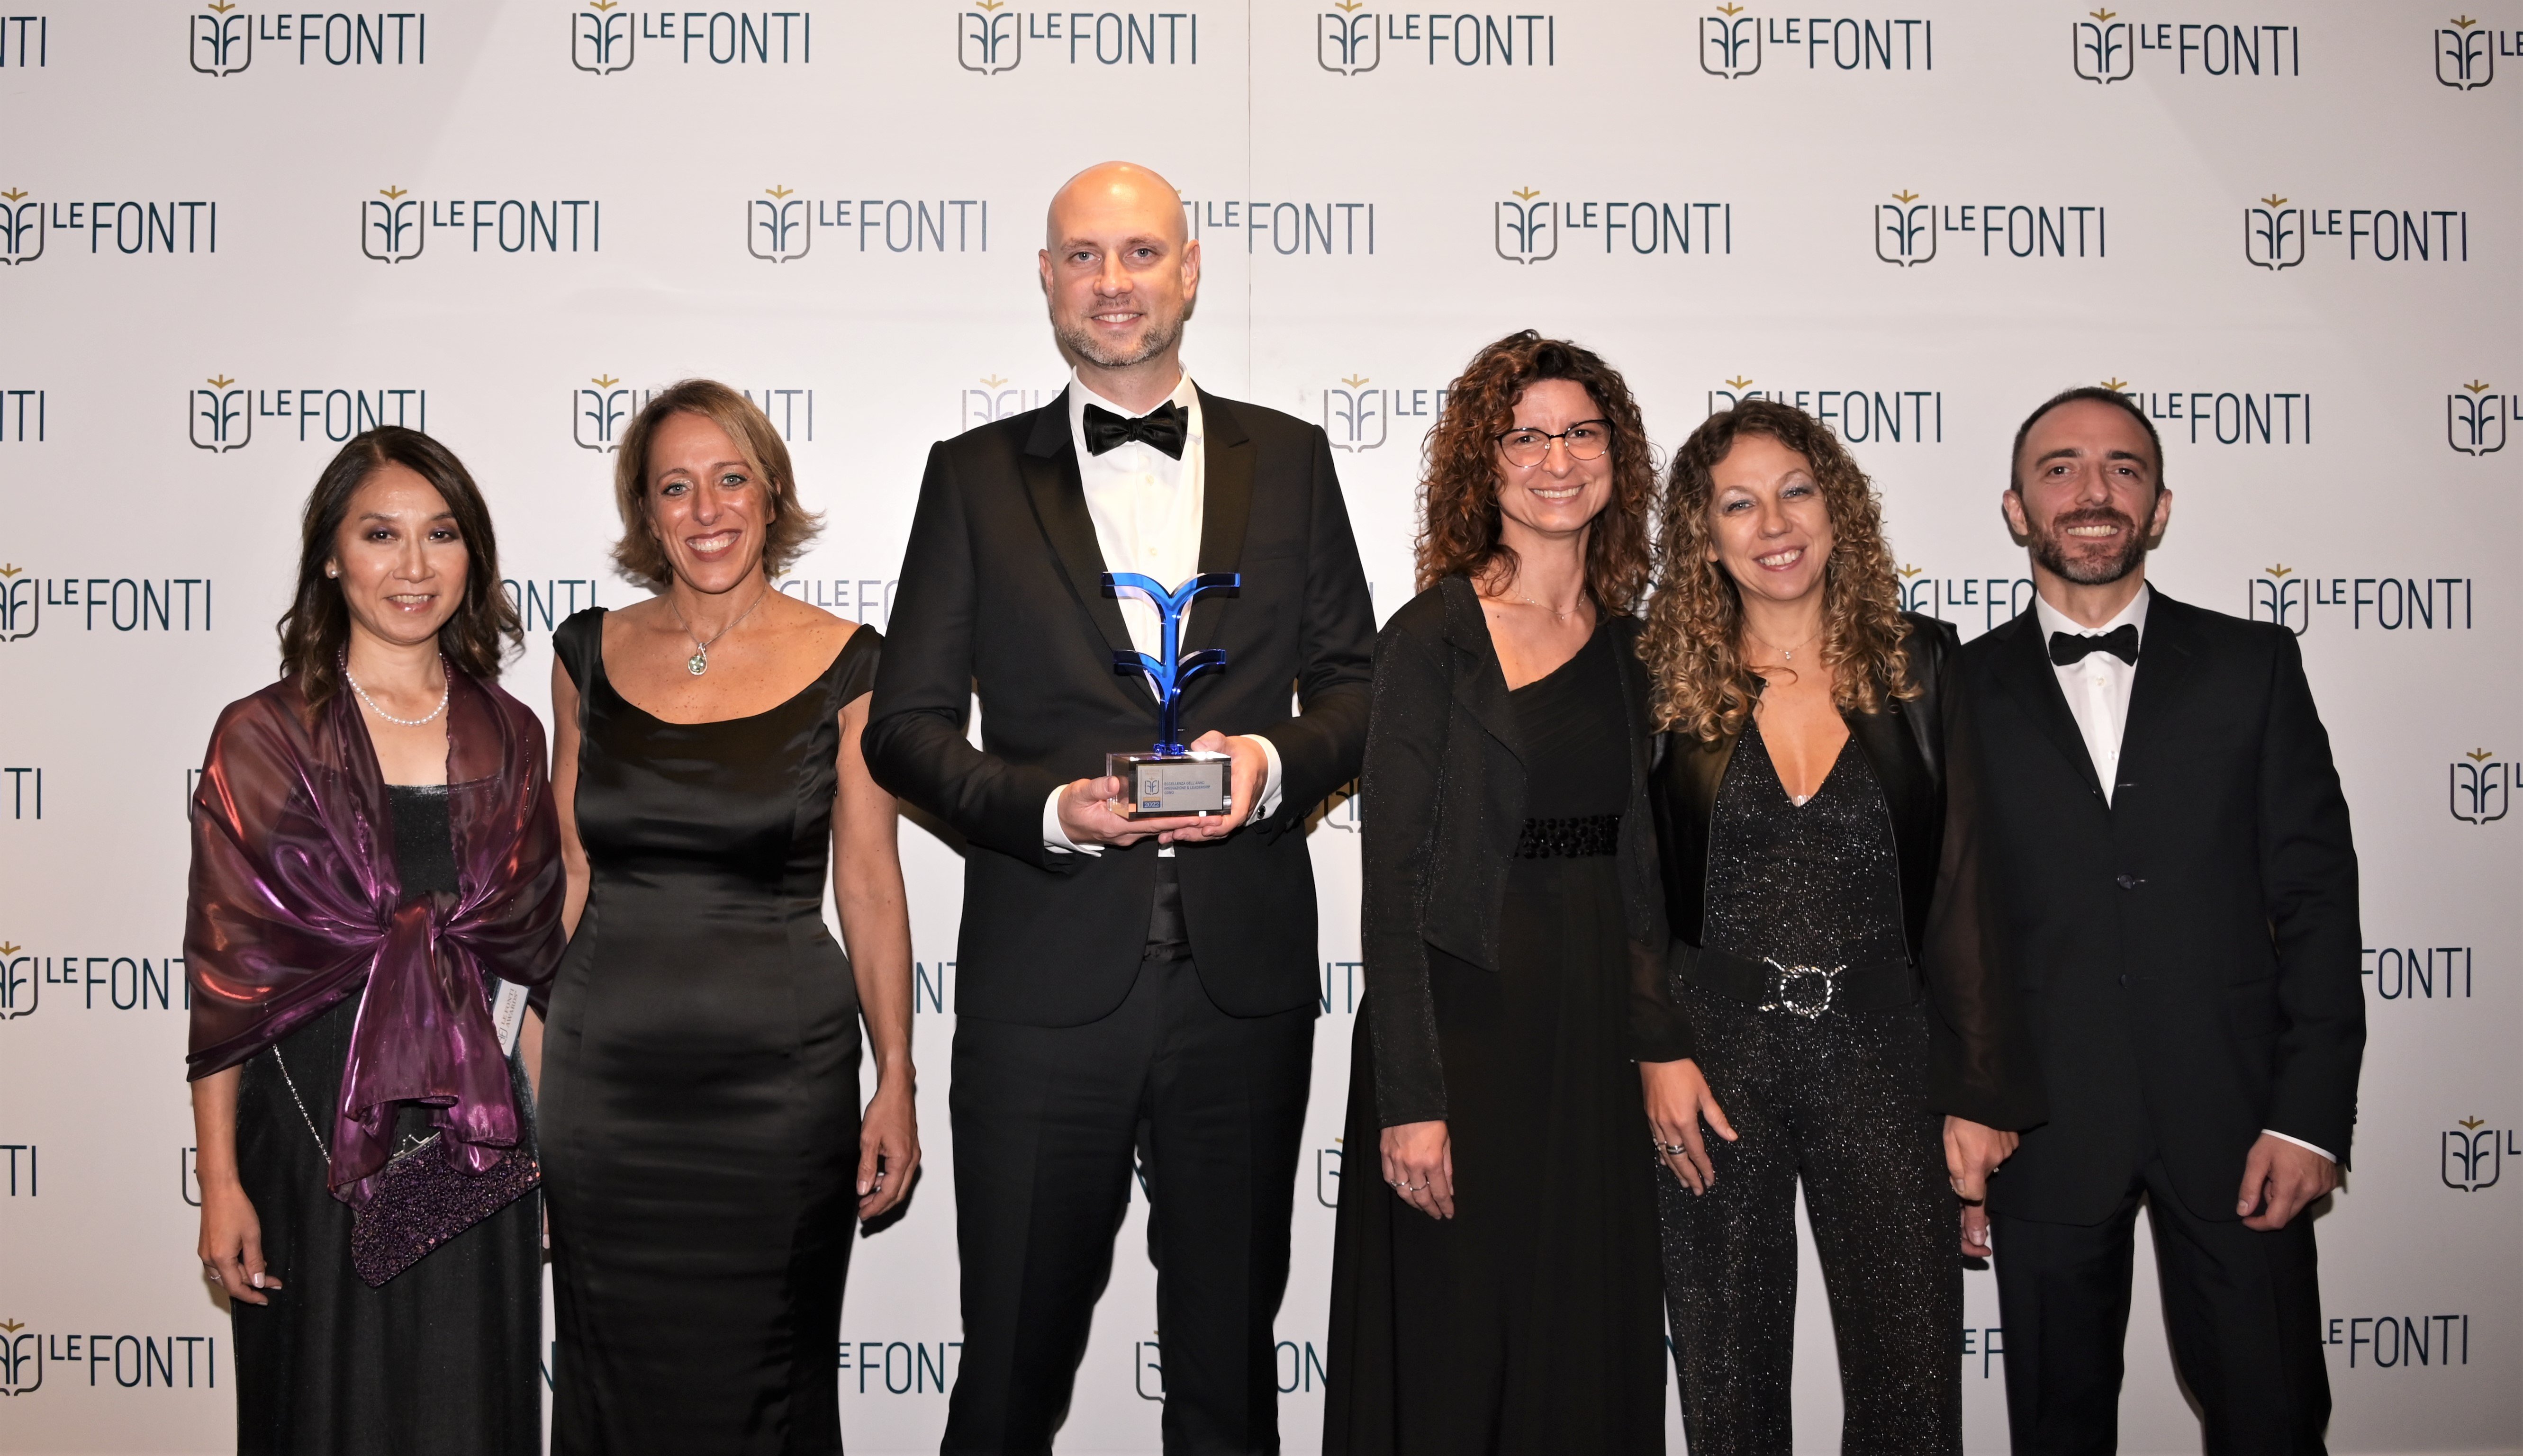 AGC Biologics Receives Excellence in Innovation and Leadership by Le Fonti Business News in Italy